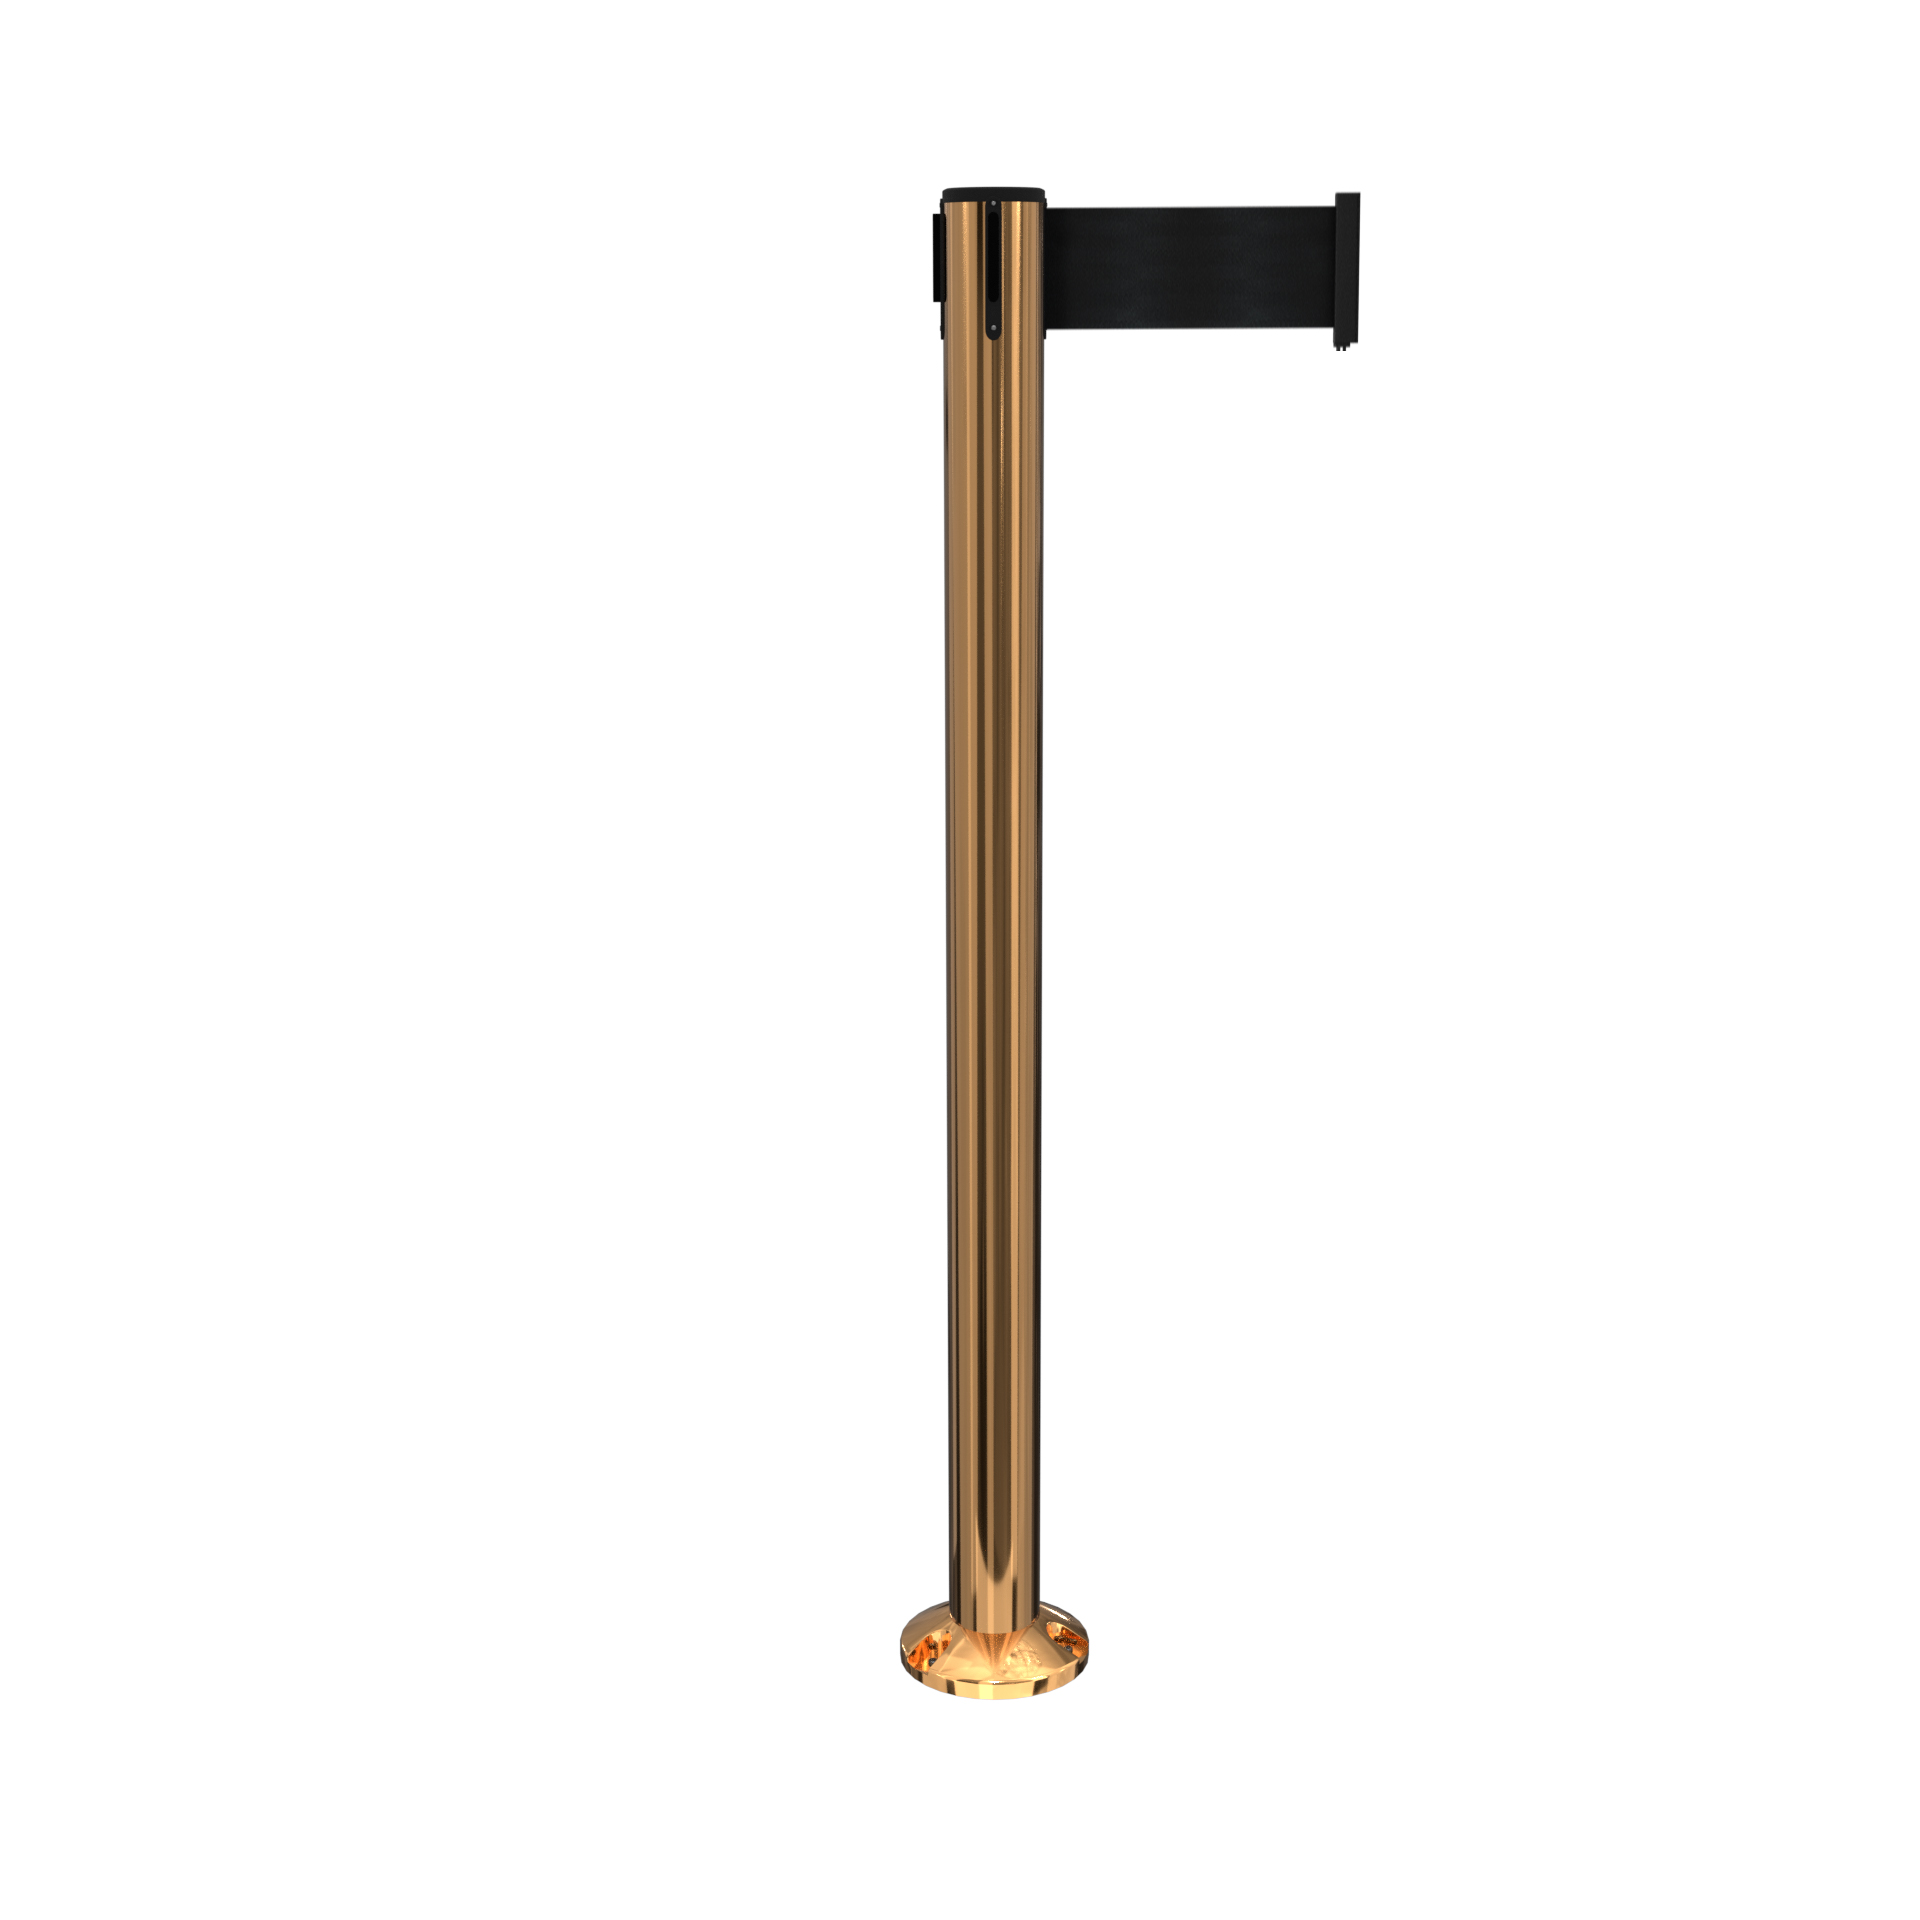 Polished Brass QueuePro 250 Fixed Retractable Belt Barrier with 3 Inch Belt